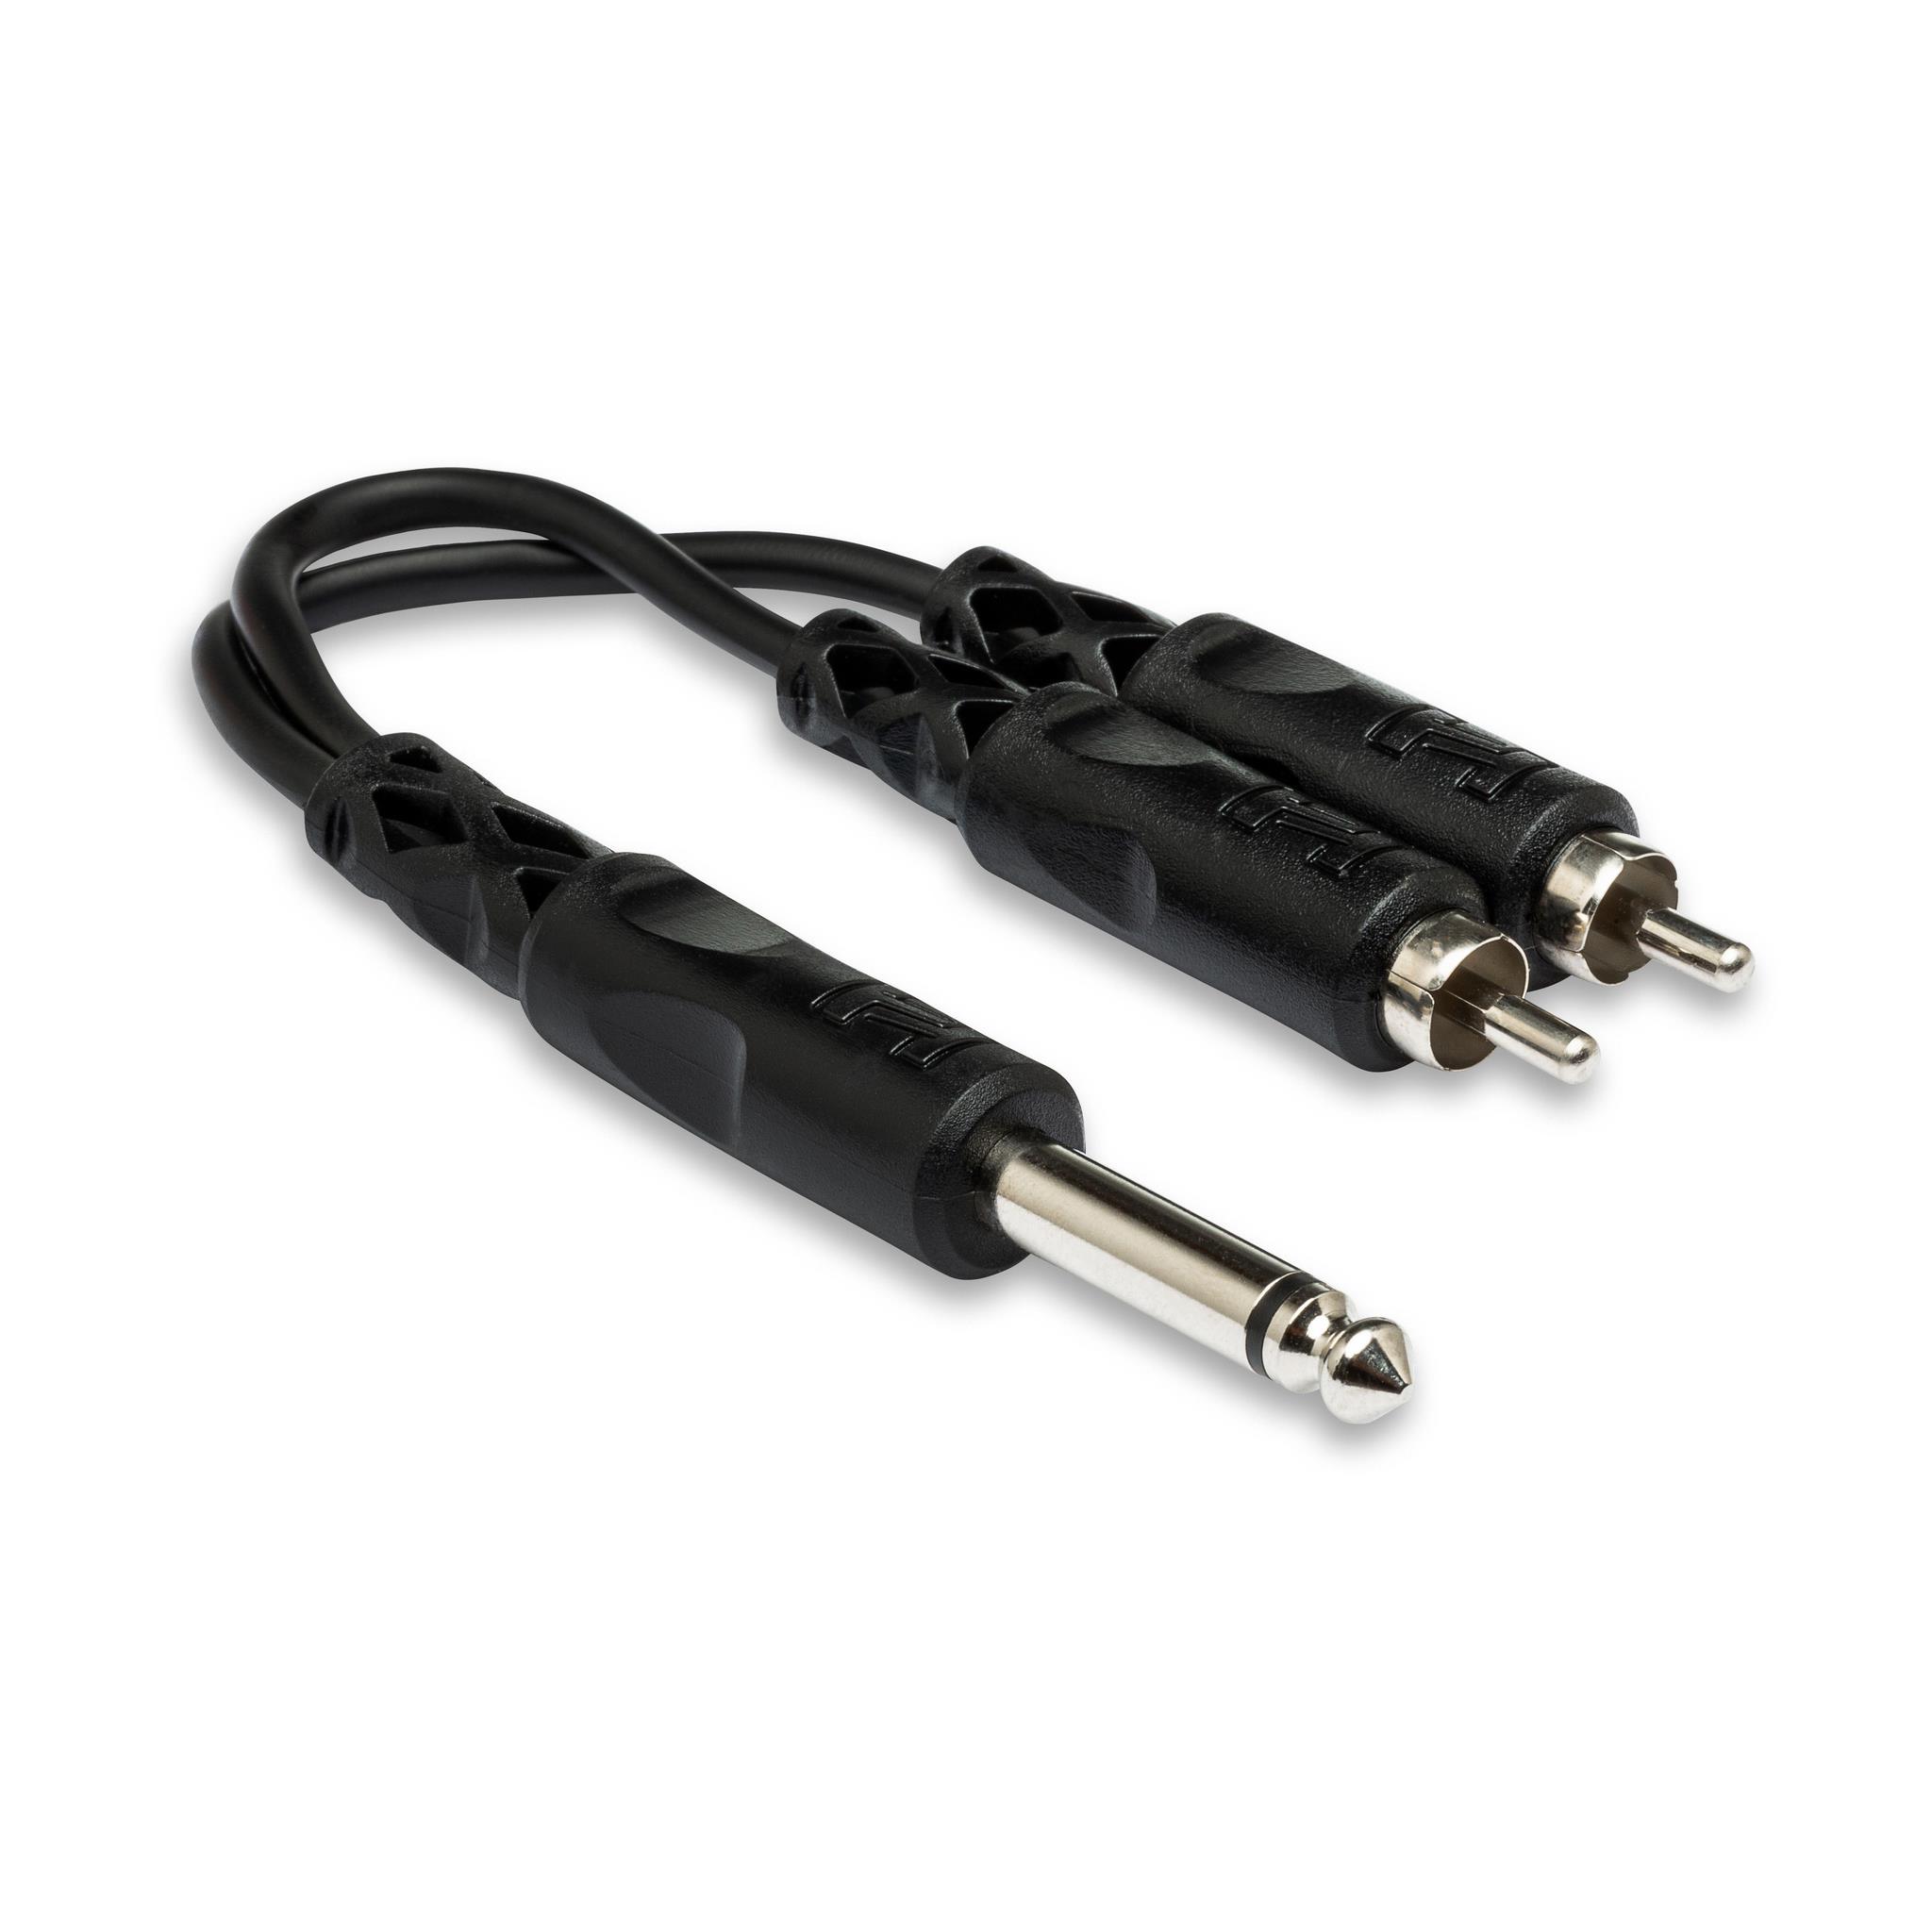 Hosa Y cable, 1/4 inch male to 2 RCA male